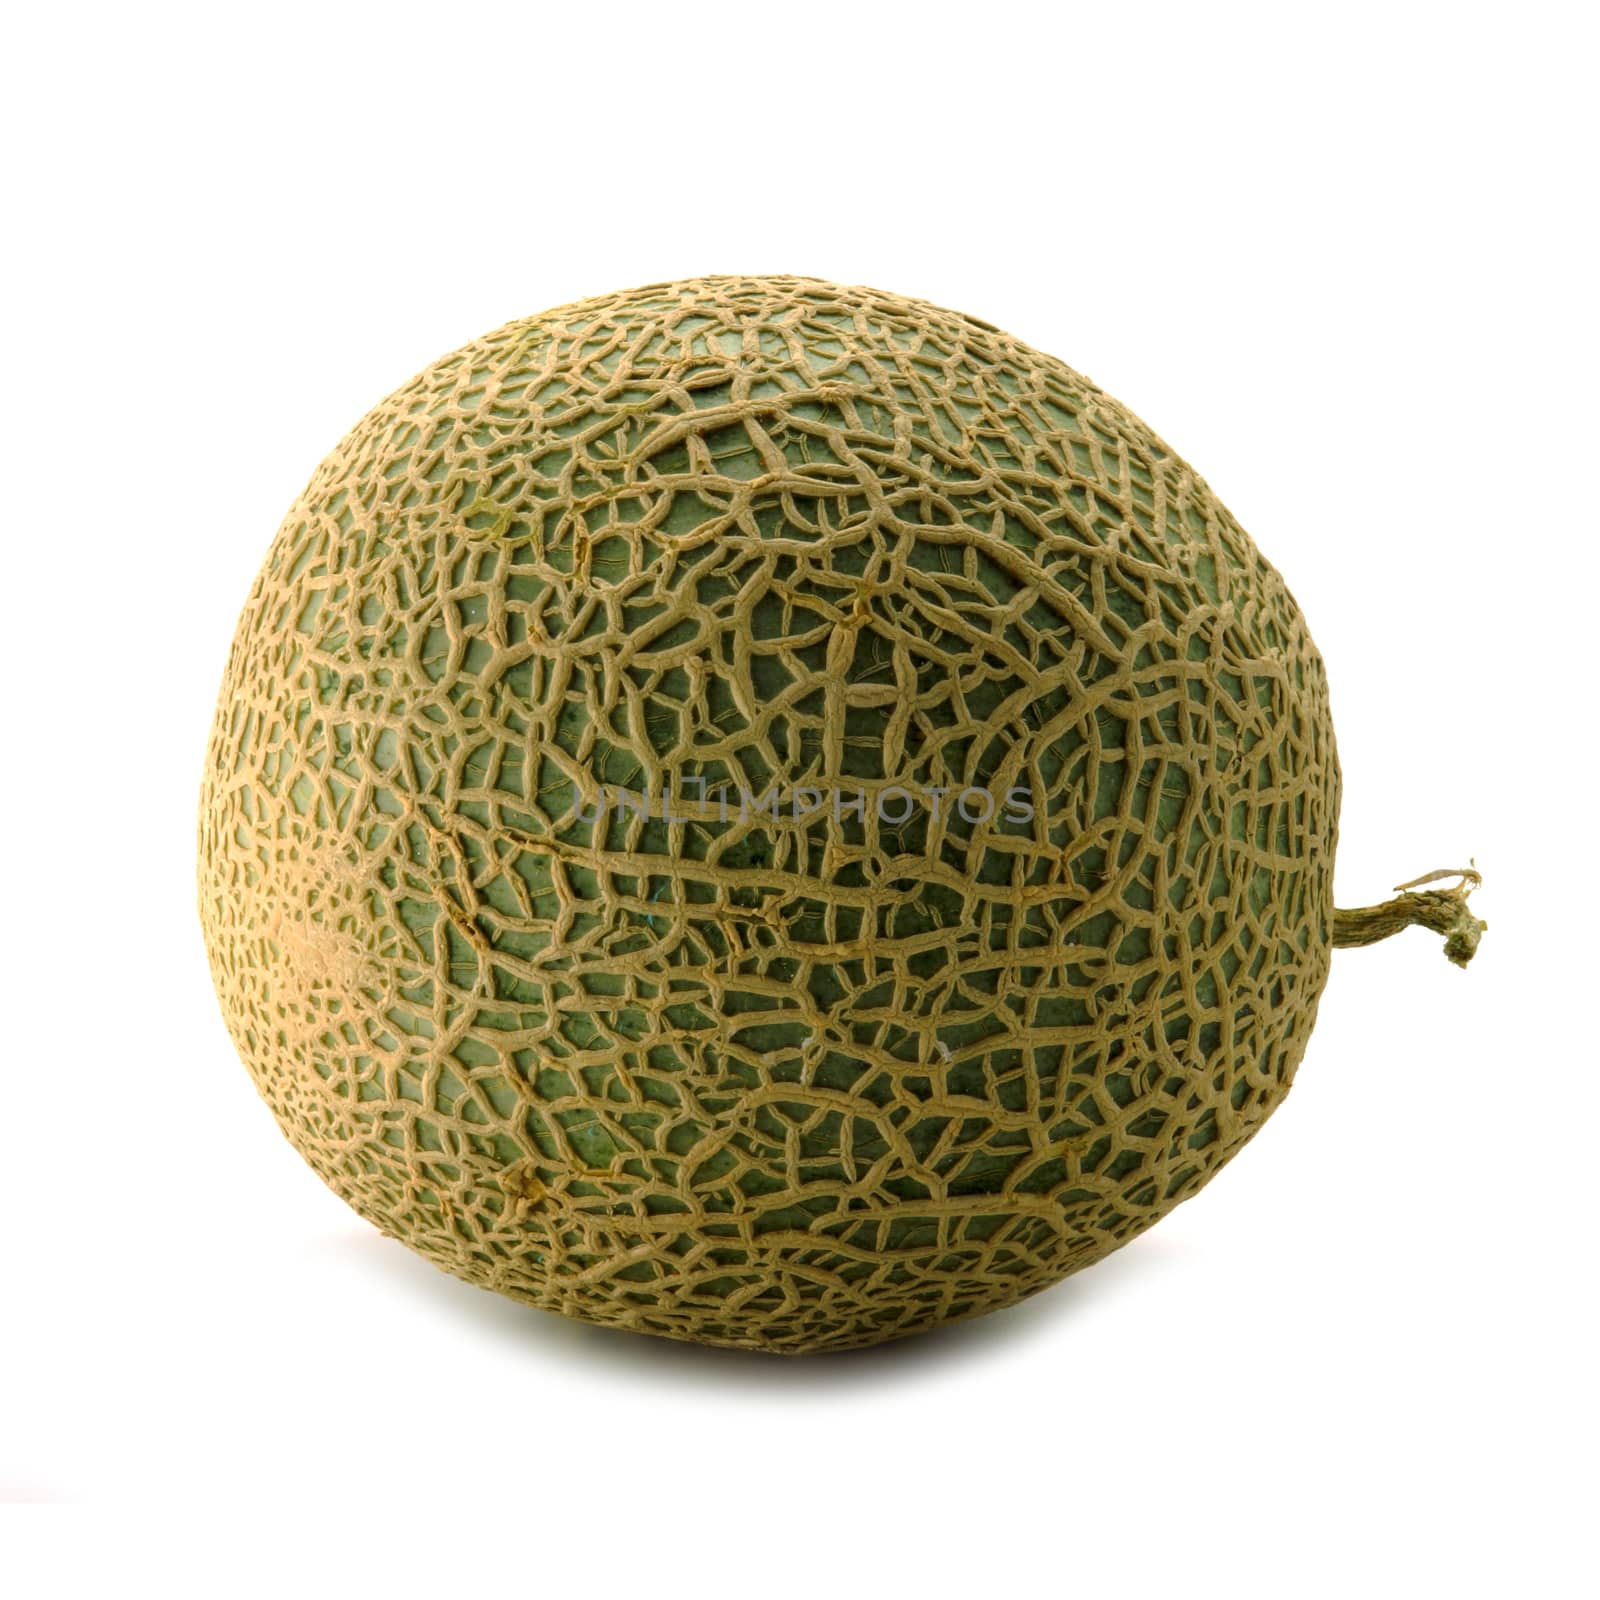 Netted melon on white background